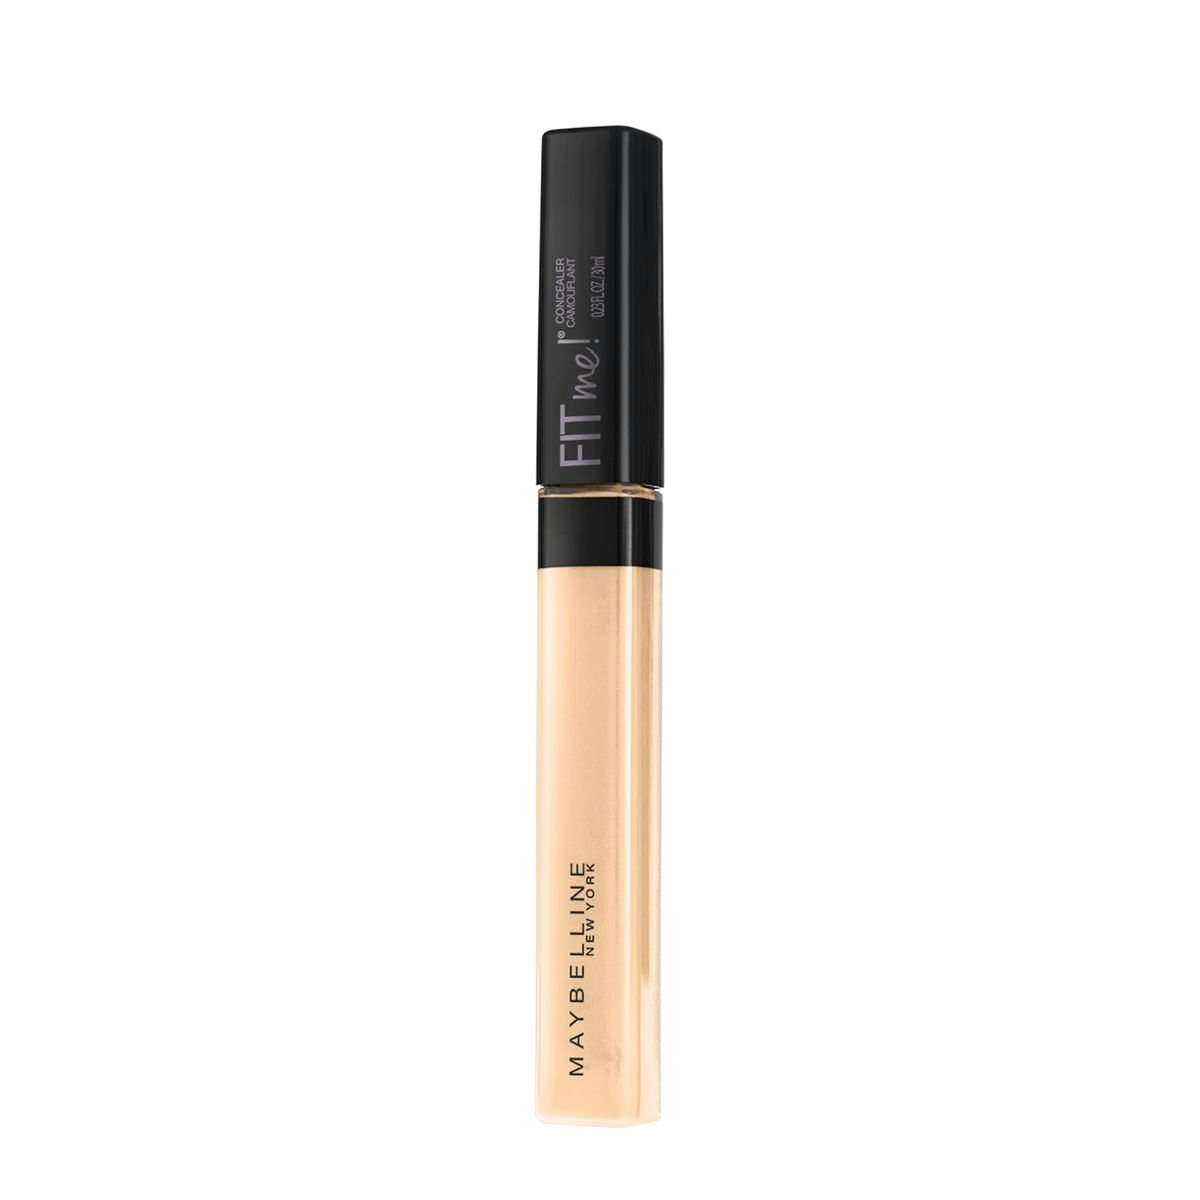 Maquillaje corrector Fit Me N20 MAYBELLINE 1 ud